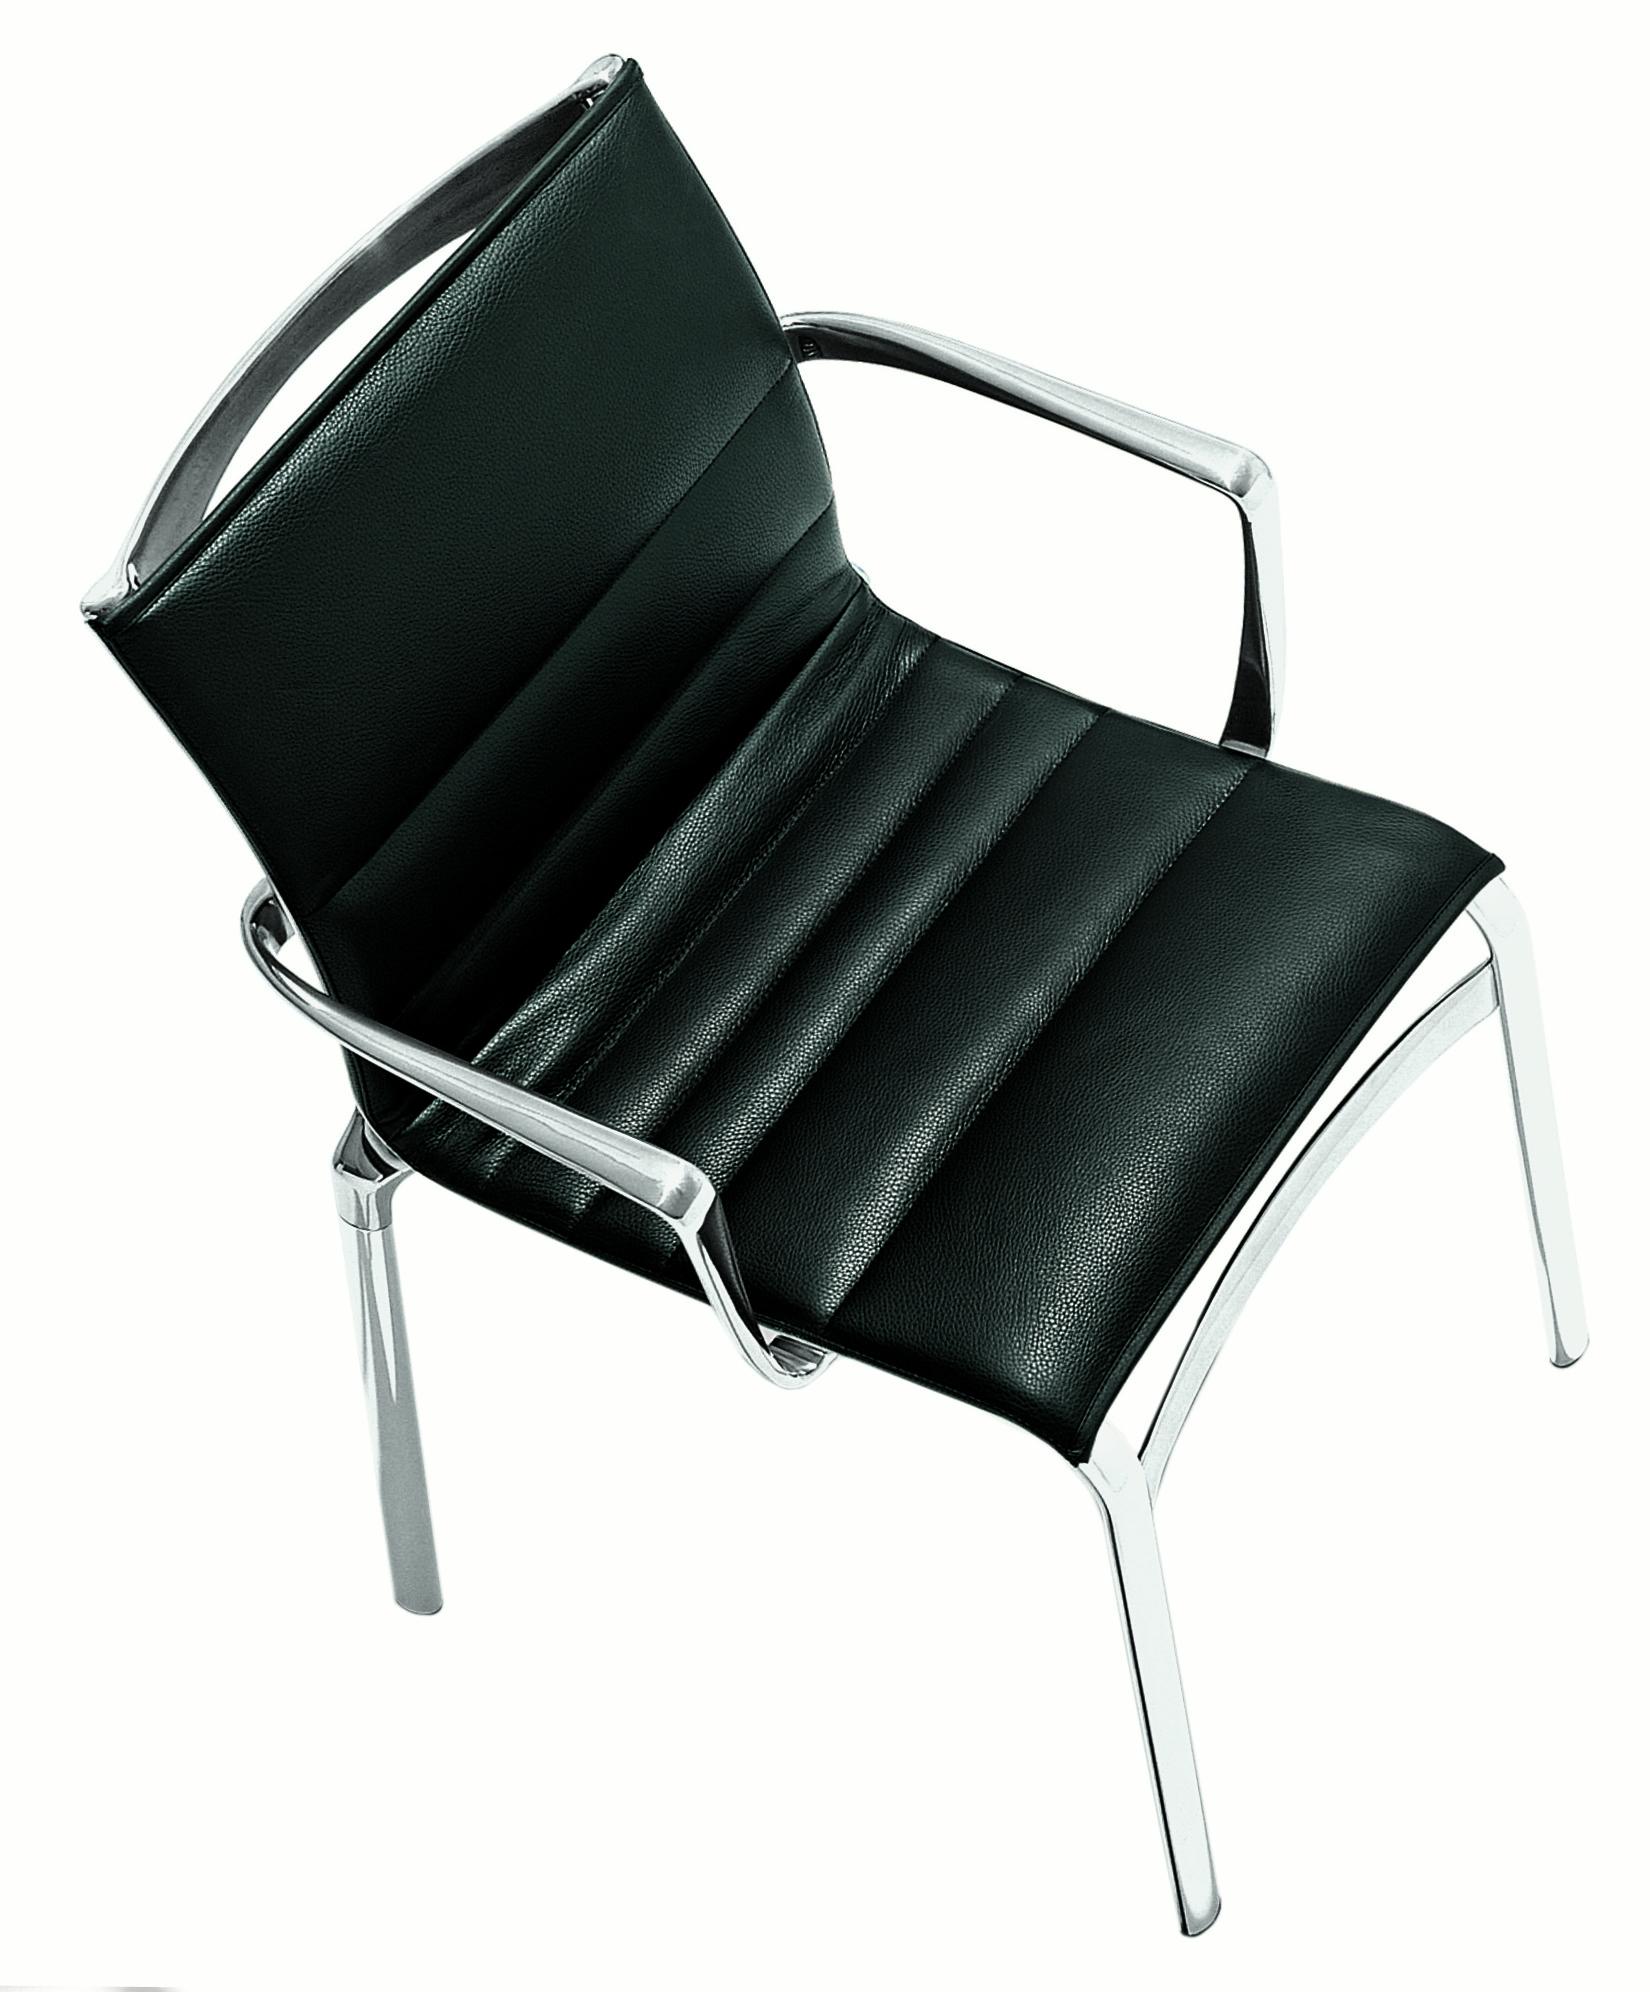 Alias 417 Highframe 40 Chair in Black Leather Seat with Chromed Aluminium Frame by Alberto Meda

Stacking chair with arms, structure composed of extruded aluminium profile and die-cast aluminium elements. Seat and back in fire retardant PVC